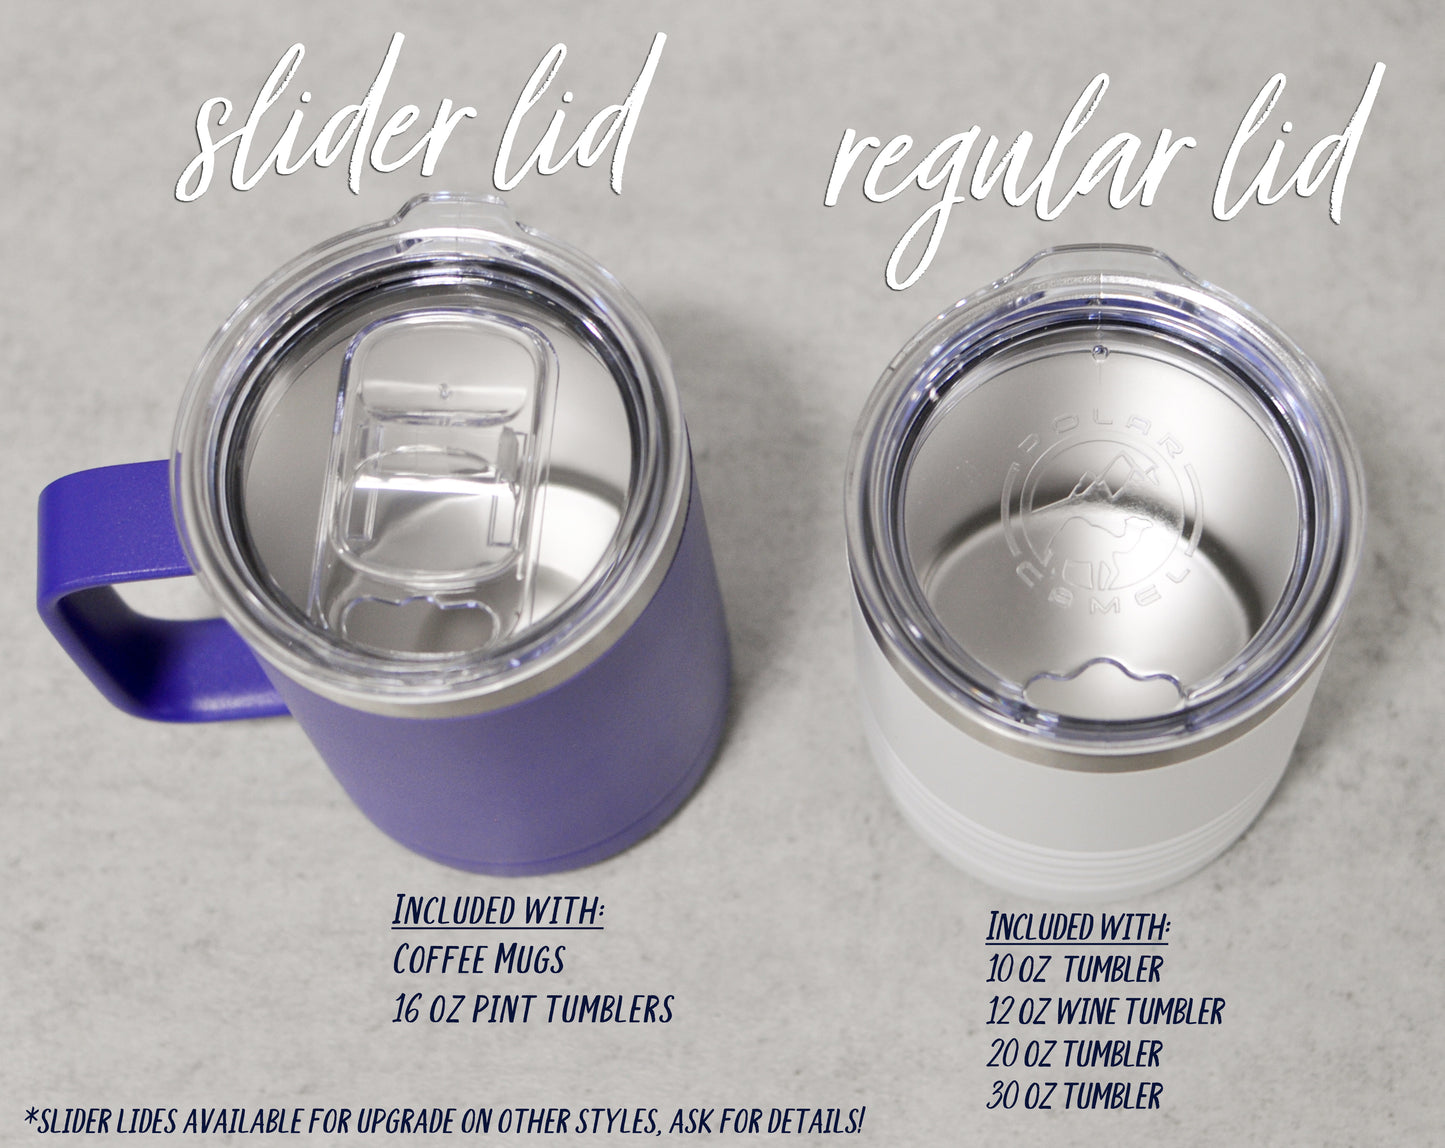 slider lid and regular lid and their included sizes